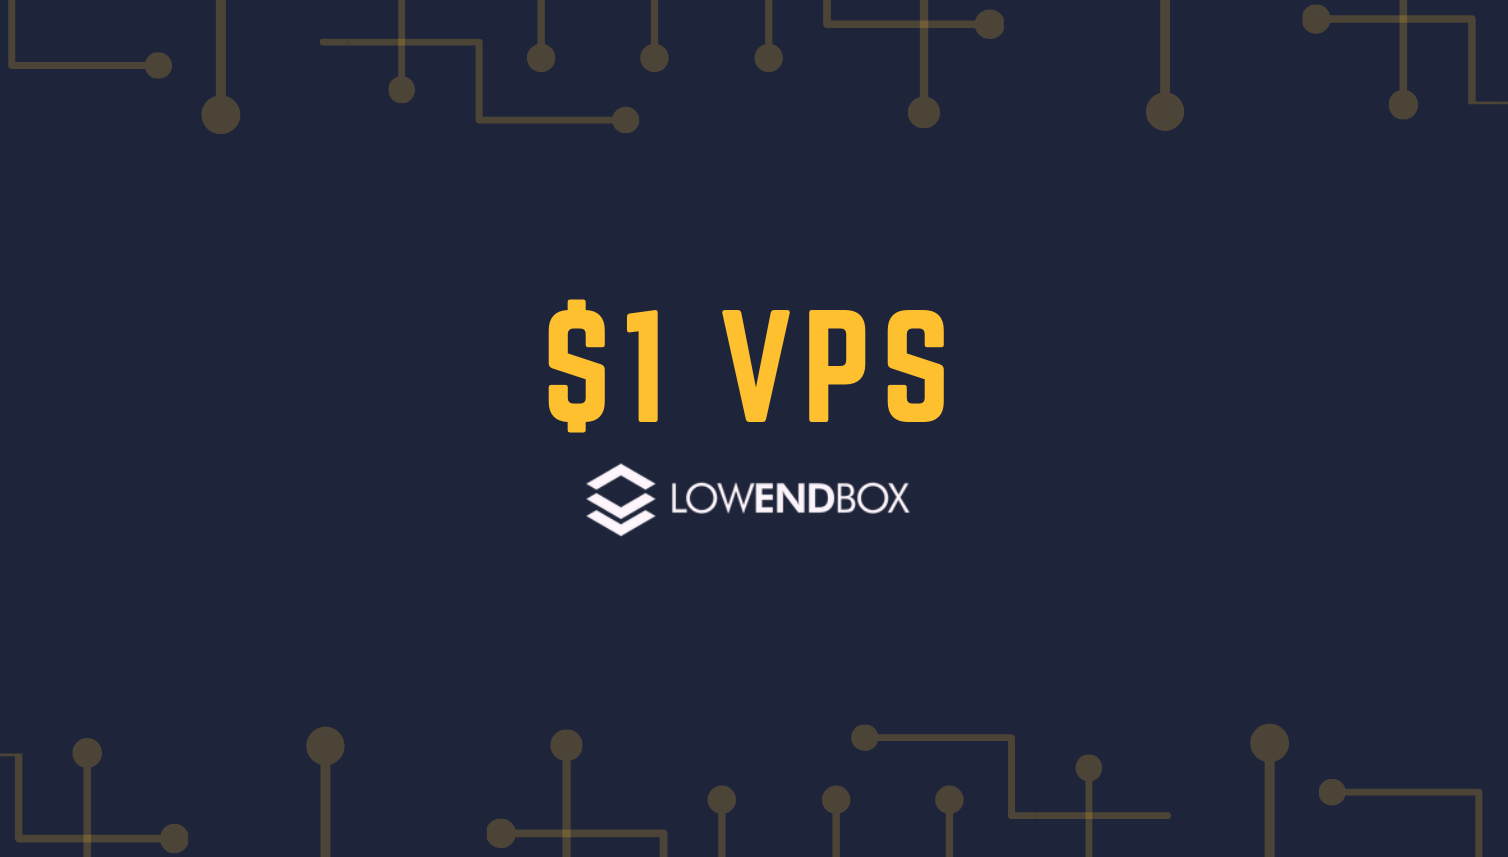 $1 VPS - 1 USD VPS Per Month (Updated July 2022) - LowEndBox